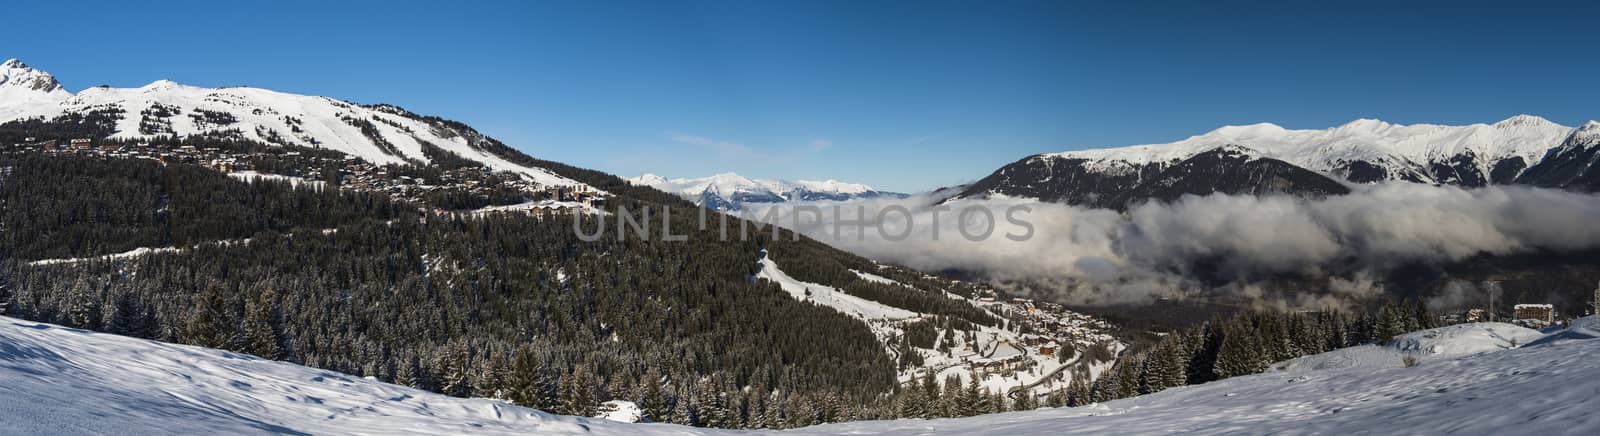 Panoramic view down an alpine mountain valley by paulvinten